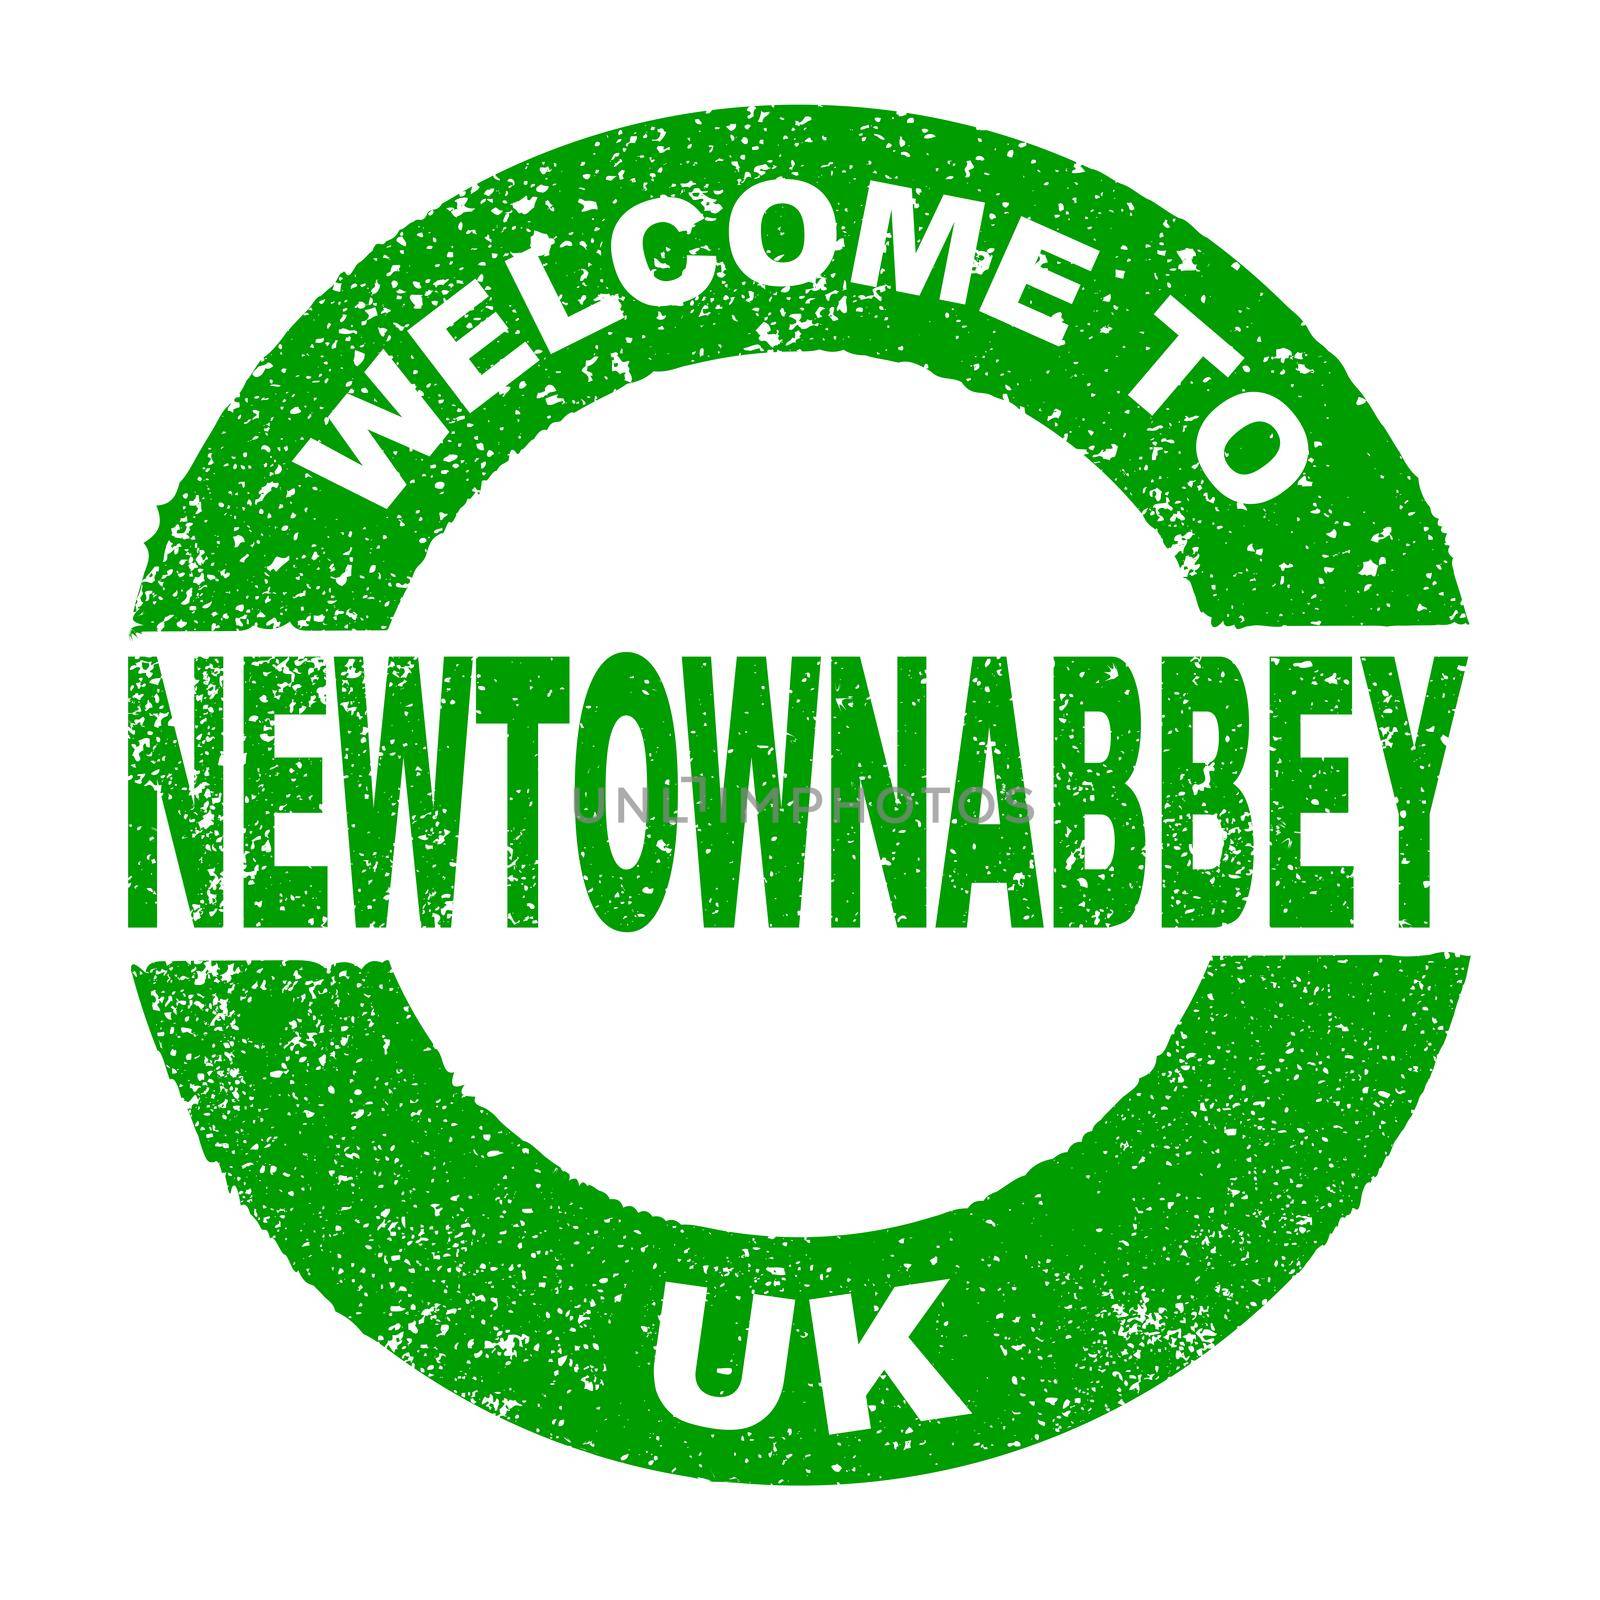 Rubber Ink Stamp Welcome To Newtownabbey UK by Bigalbaloo